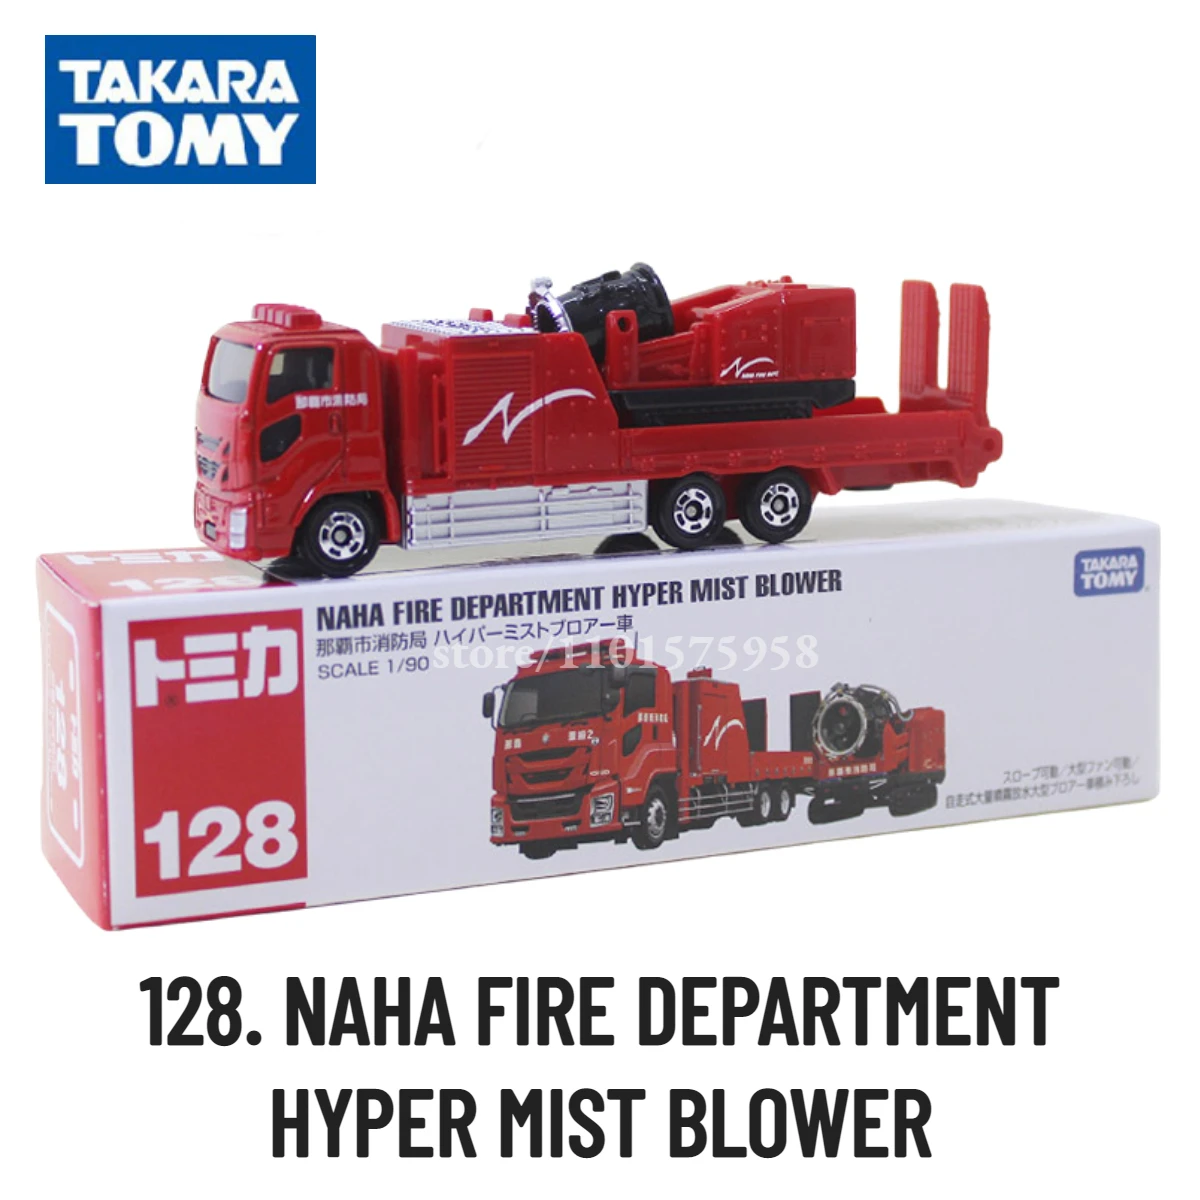 Takara Tomy Tomica Transporter, 128. NAHA FIRE DEPARTMENT HYPER MIST BLOWER Scale Truck Car Model Miniature Toy for Boy takara tomy tomica classic 31 60 sakai city fire bureau rescue scale car model replica collection kids xmas gift toys for boys